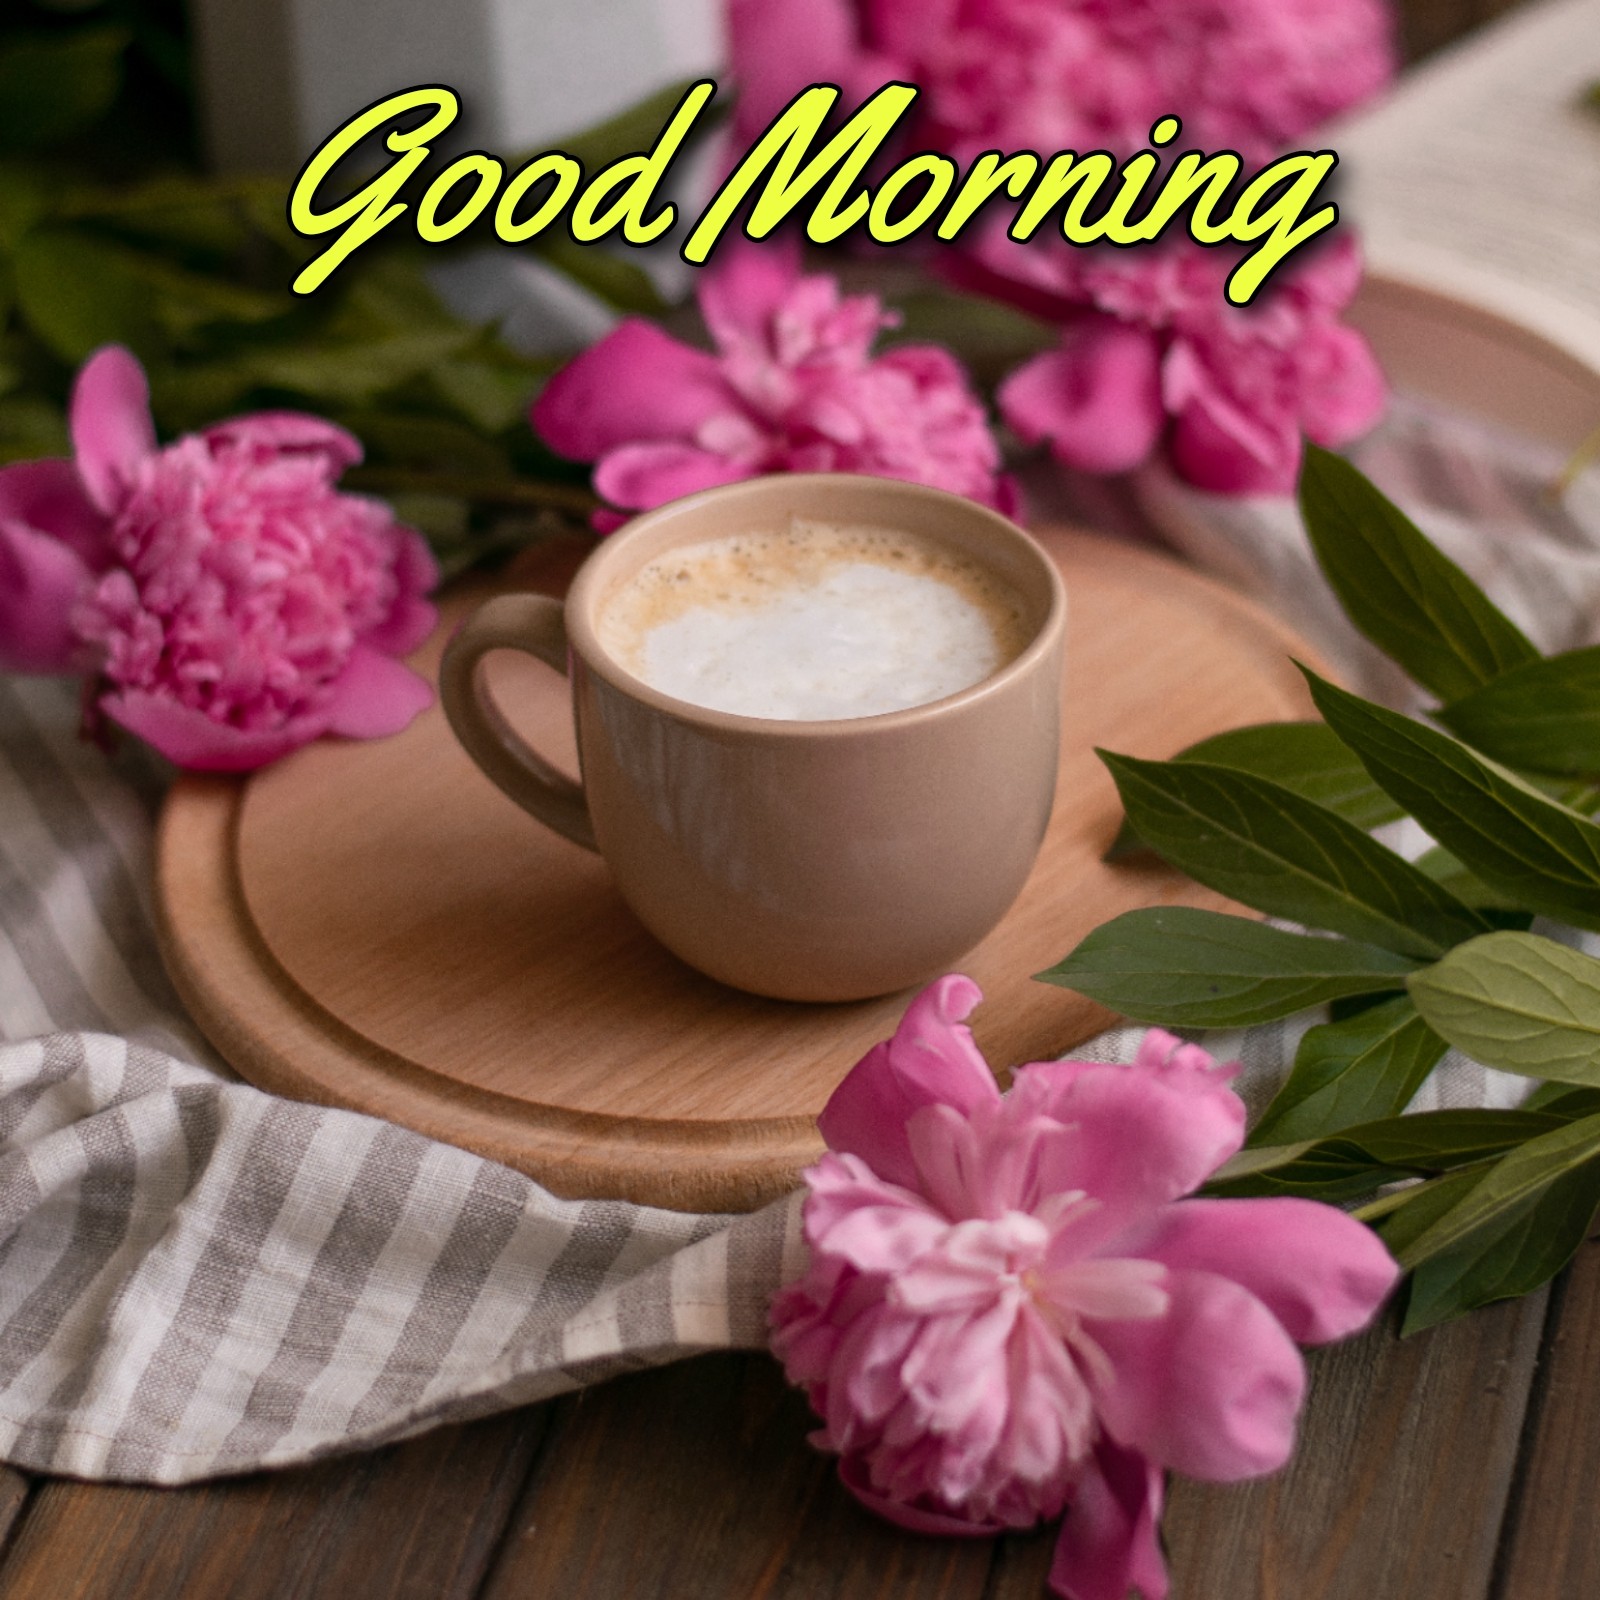 70+ Good Morning Flower Images, Wishes & Quotes - ShortGoodQuotes